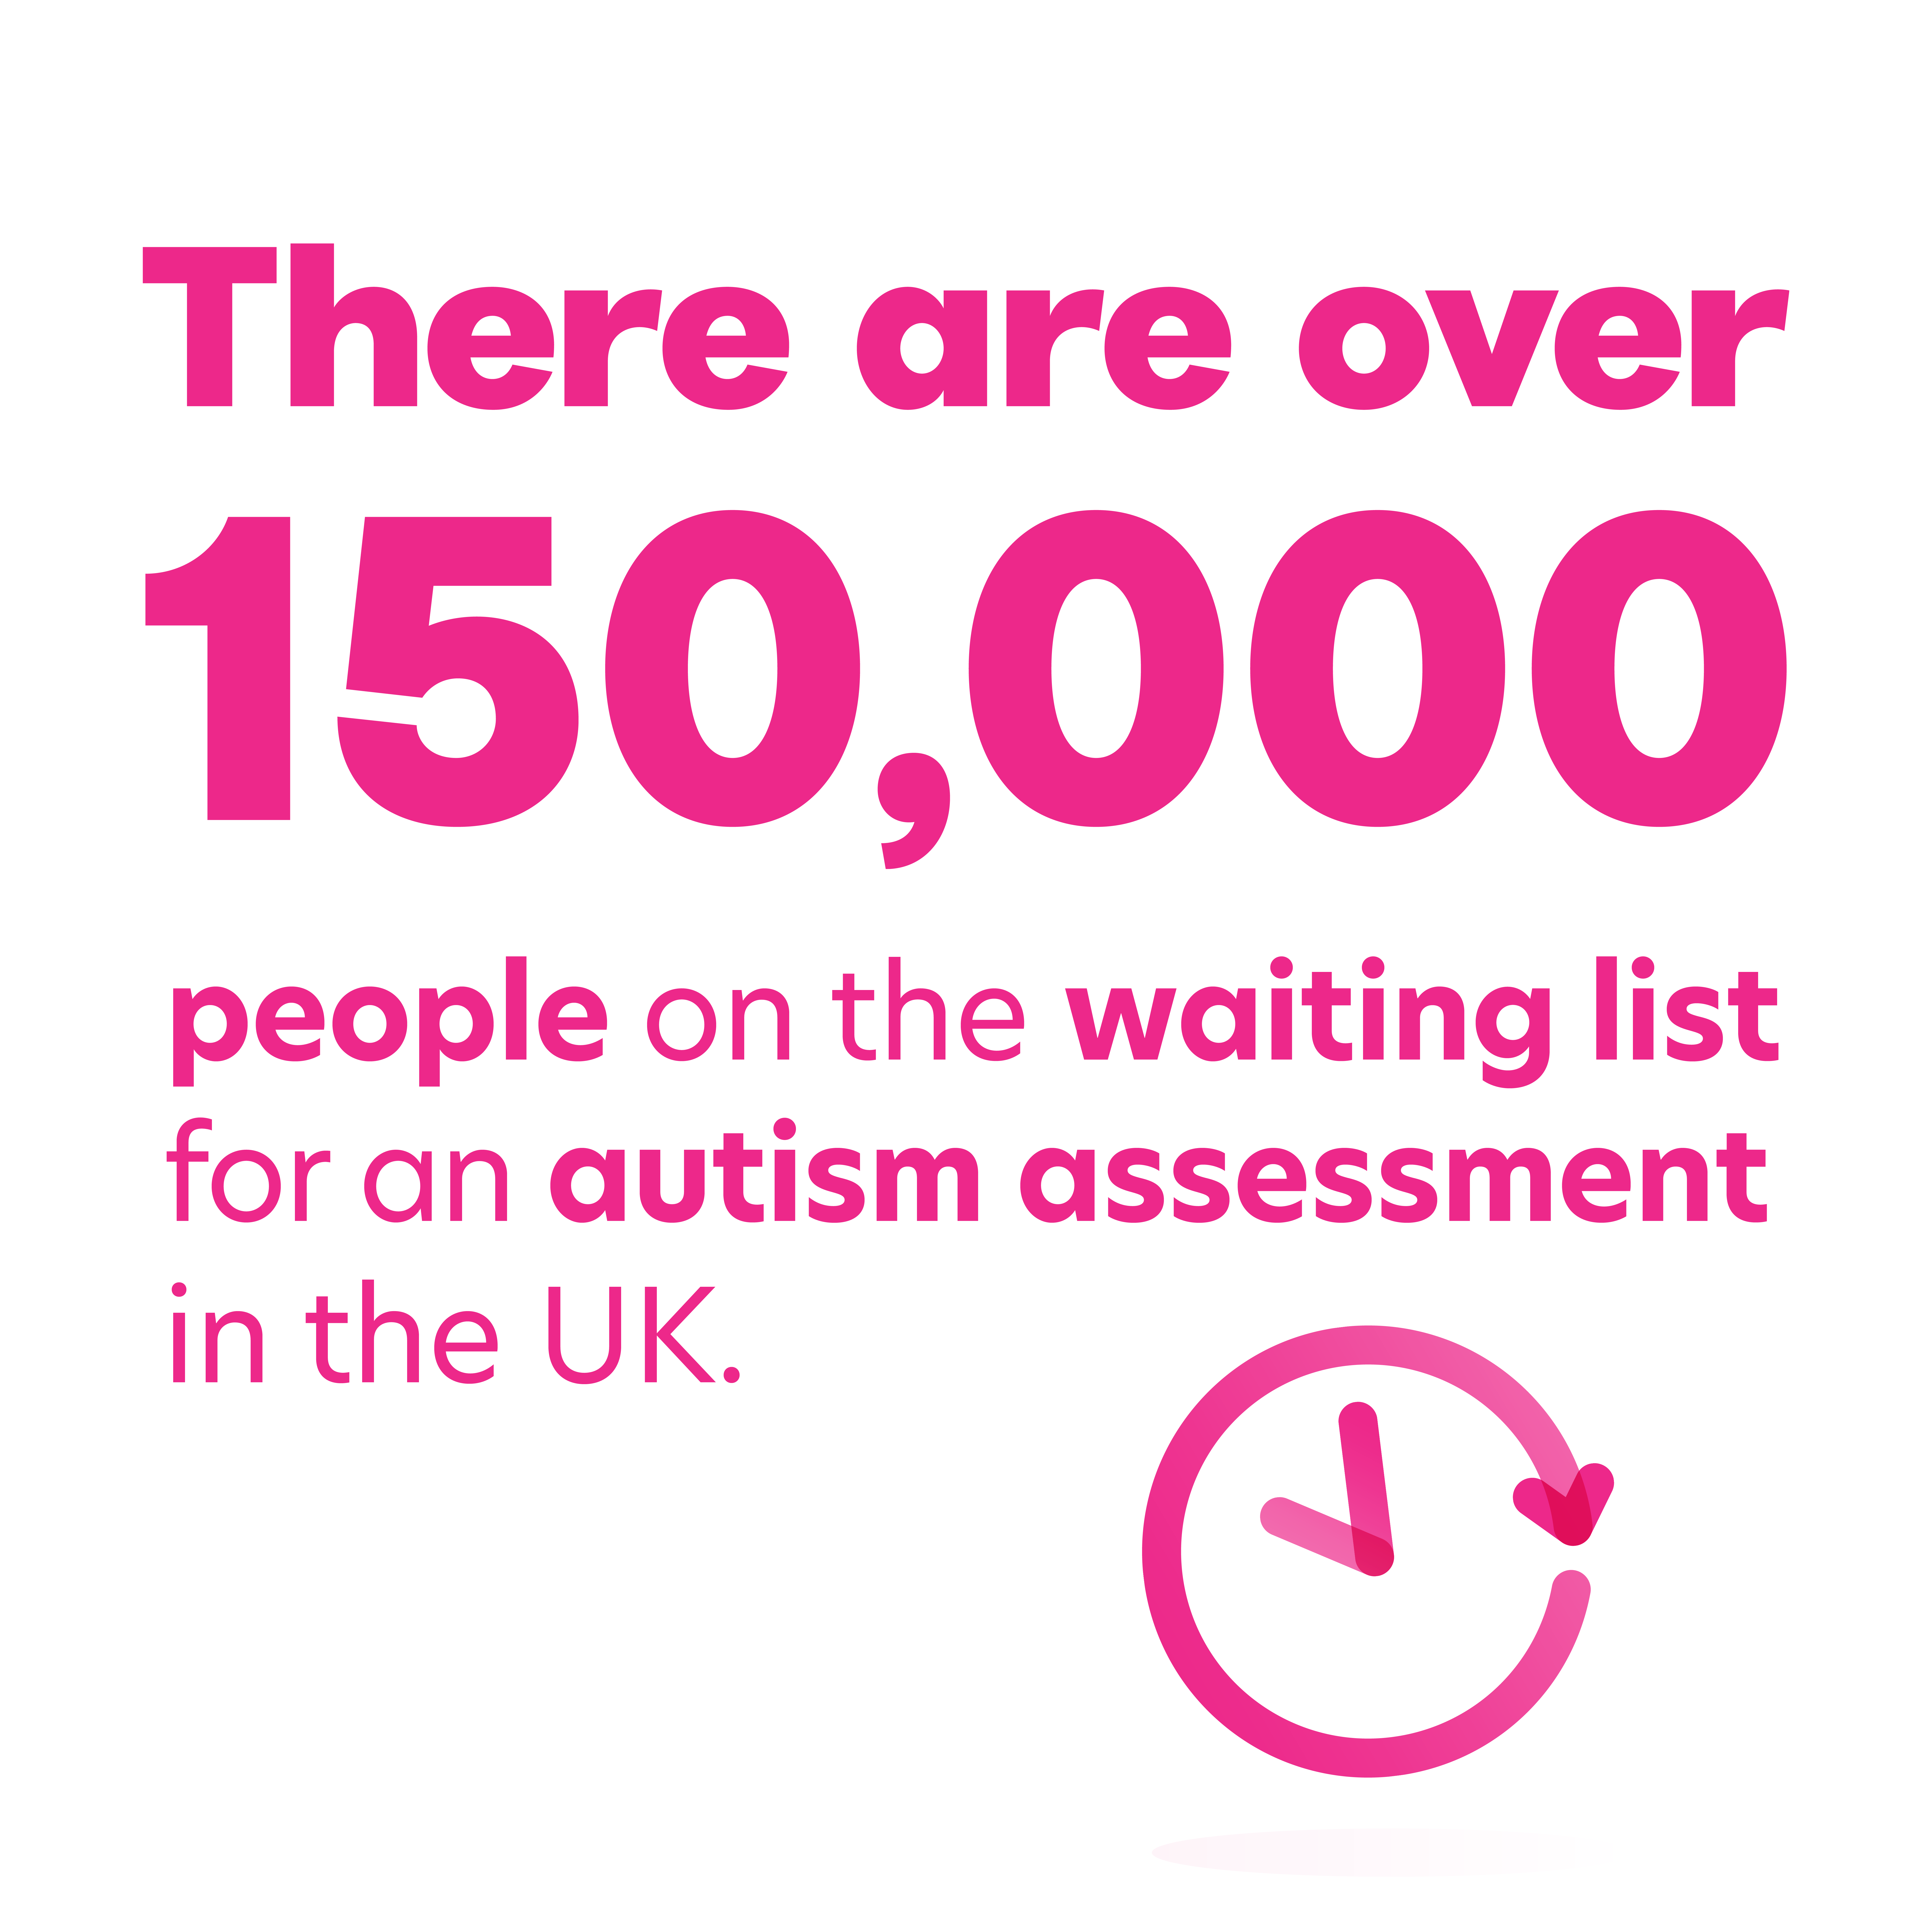 There are over 150,000 people on the waiting list for an autism assessment in the UK